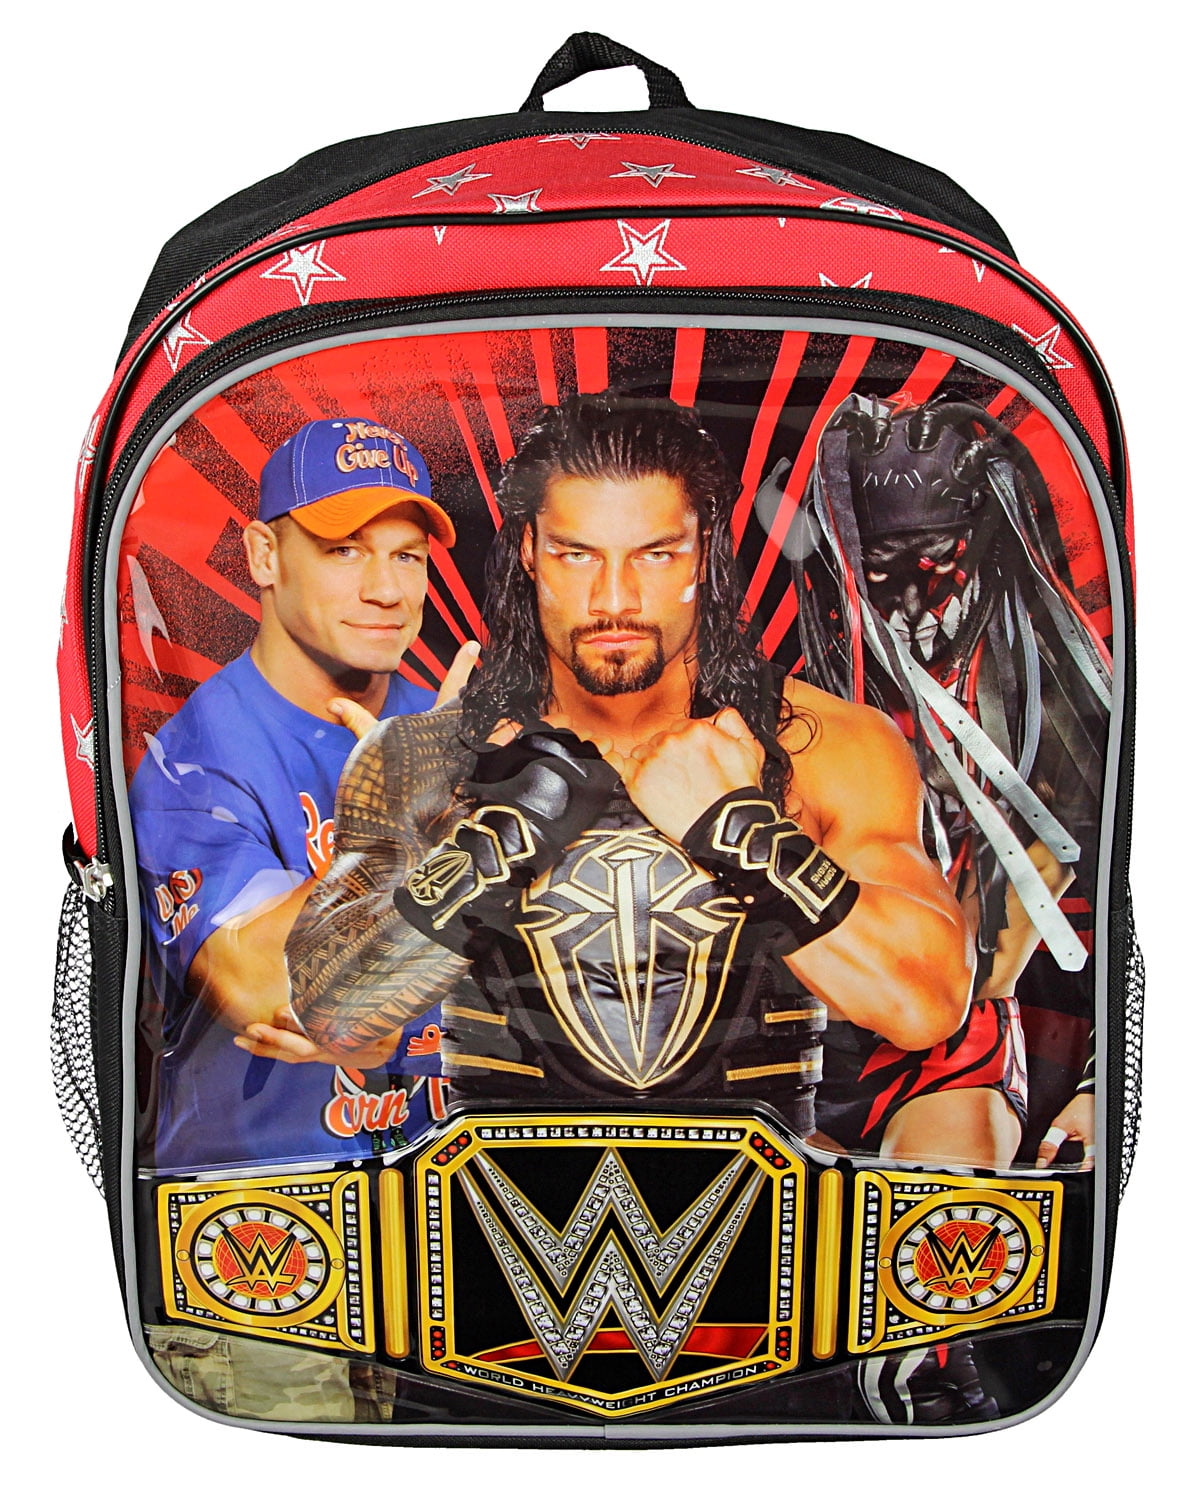 WWE Roman Reigns Backpack StudentPack - Roman Reigns The Bloodline